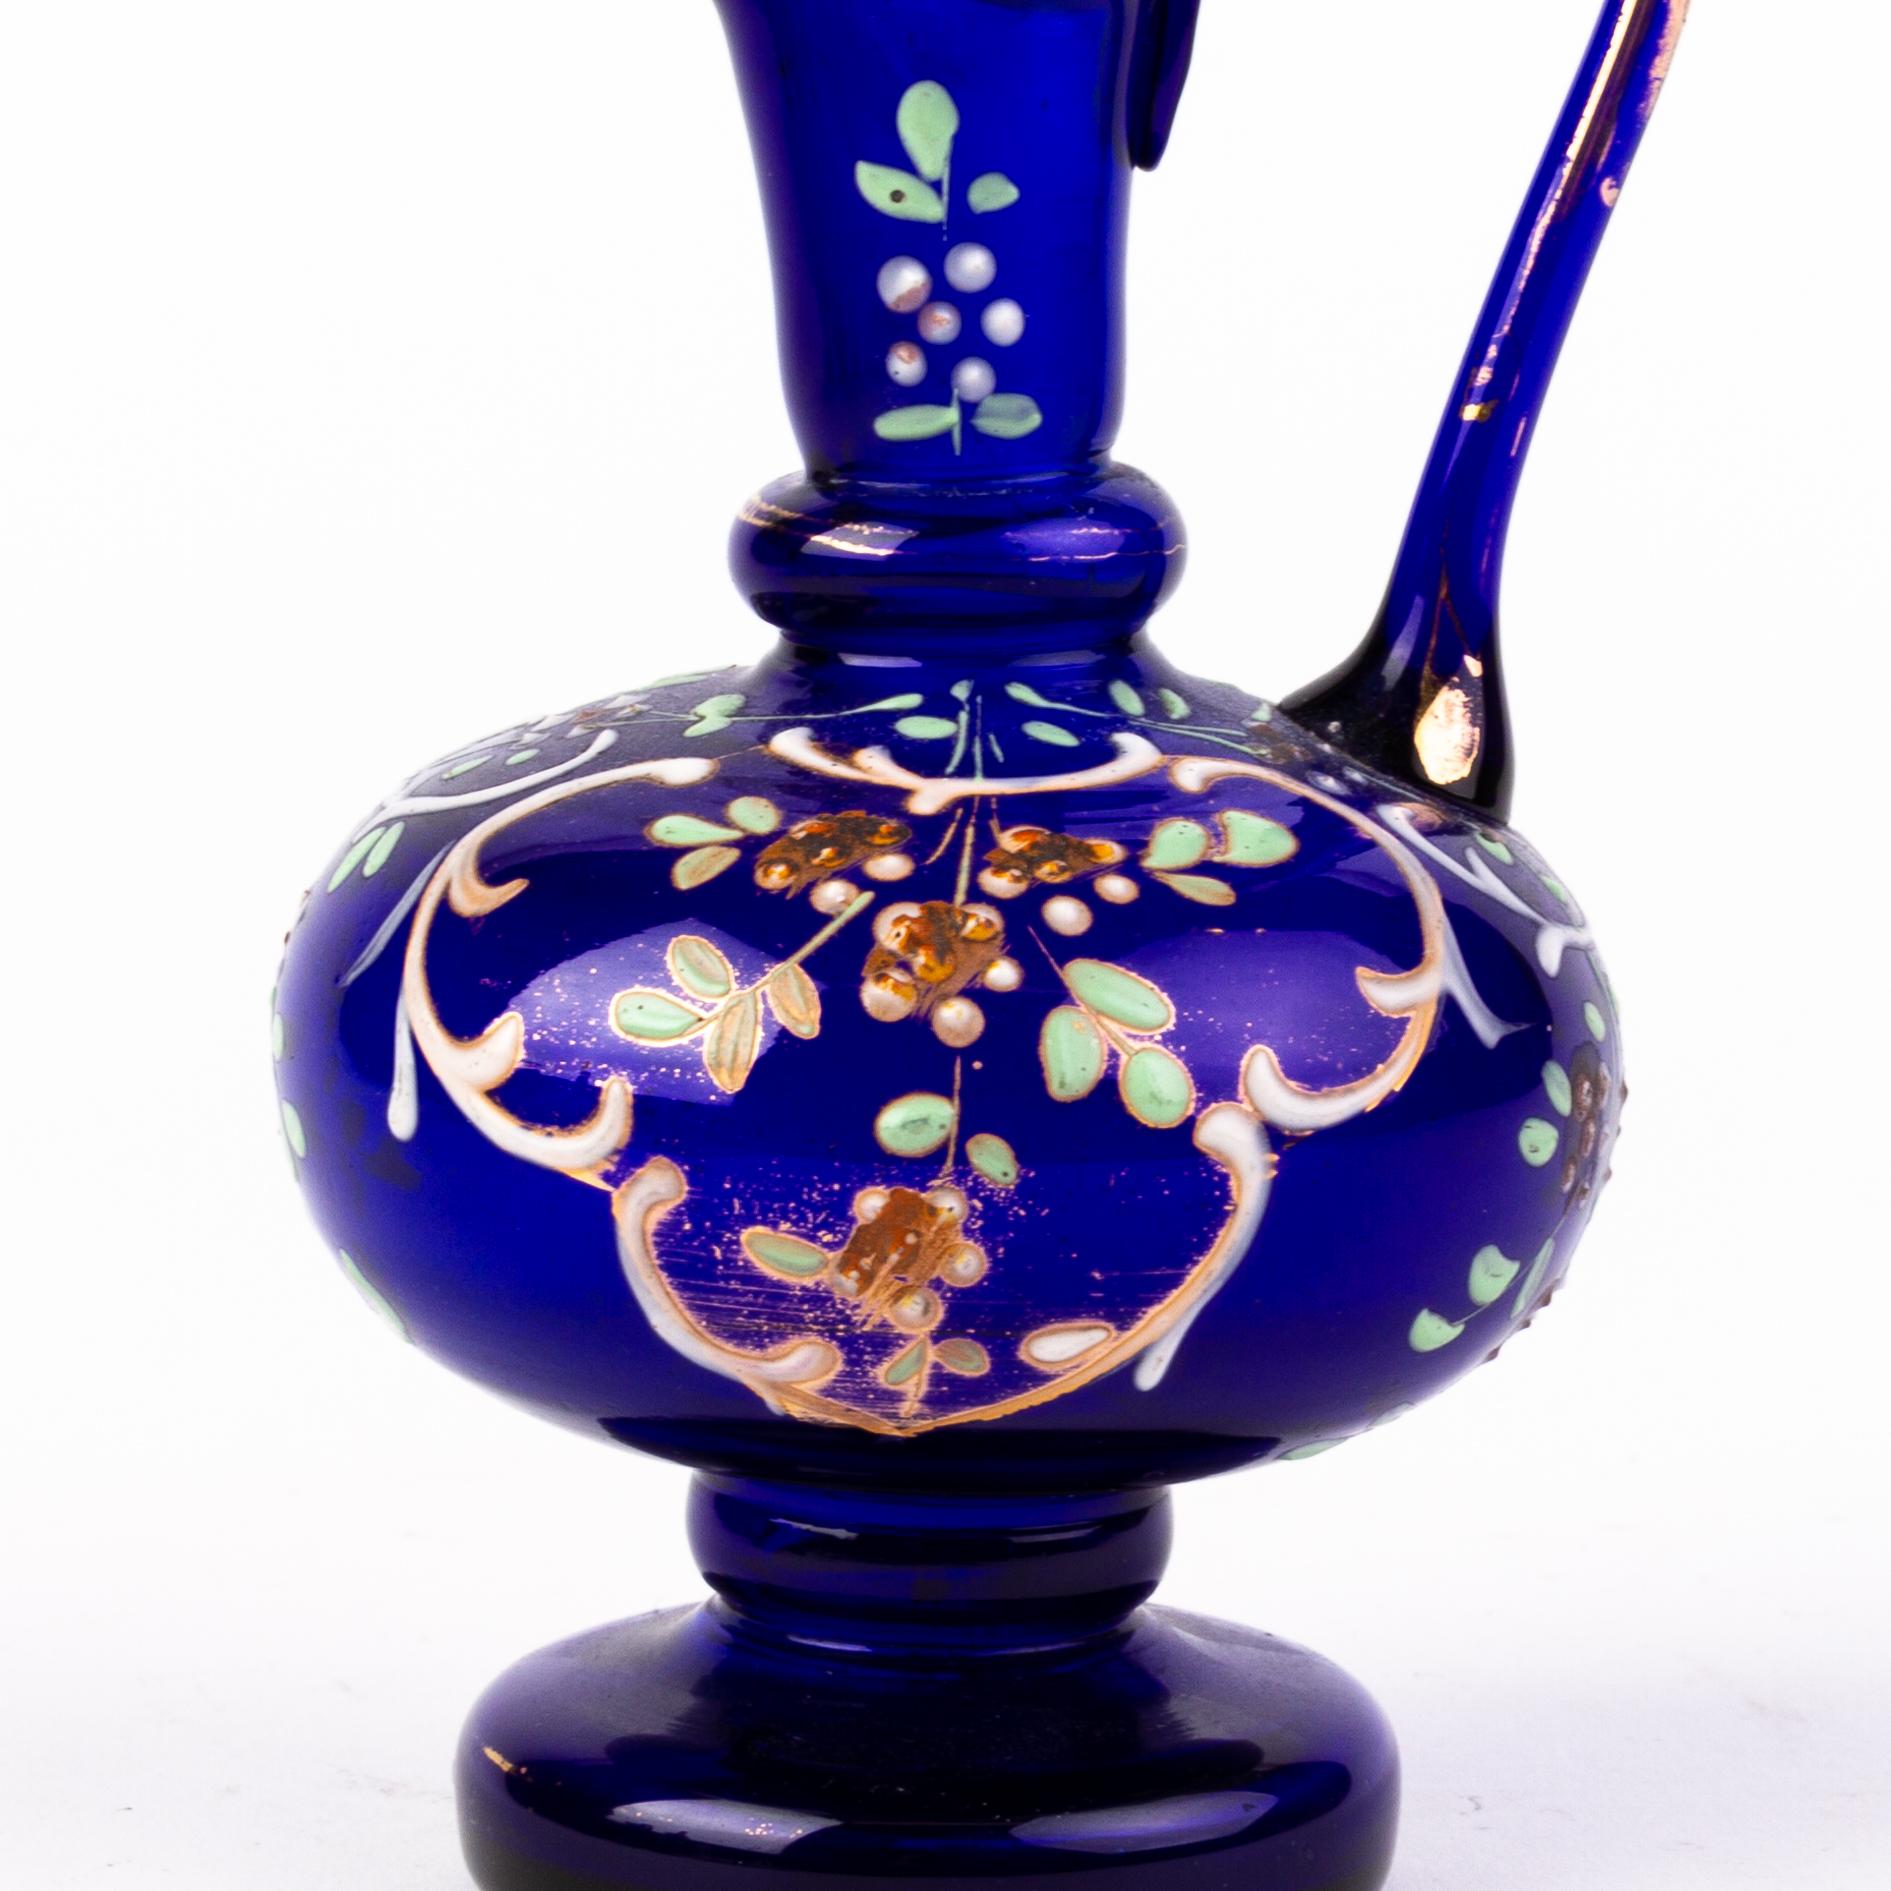 In good condition
From a private collection
Bristol Blue Victorian Glass Ewer 19th Century